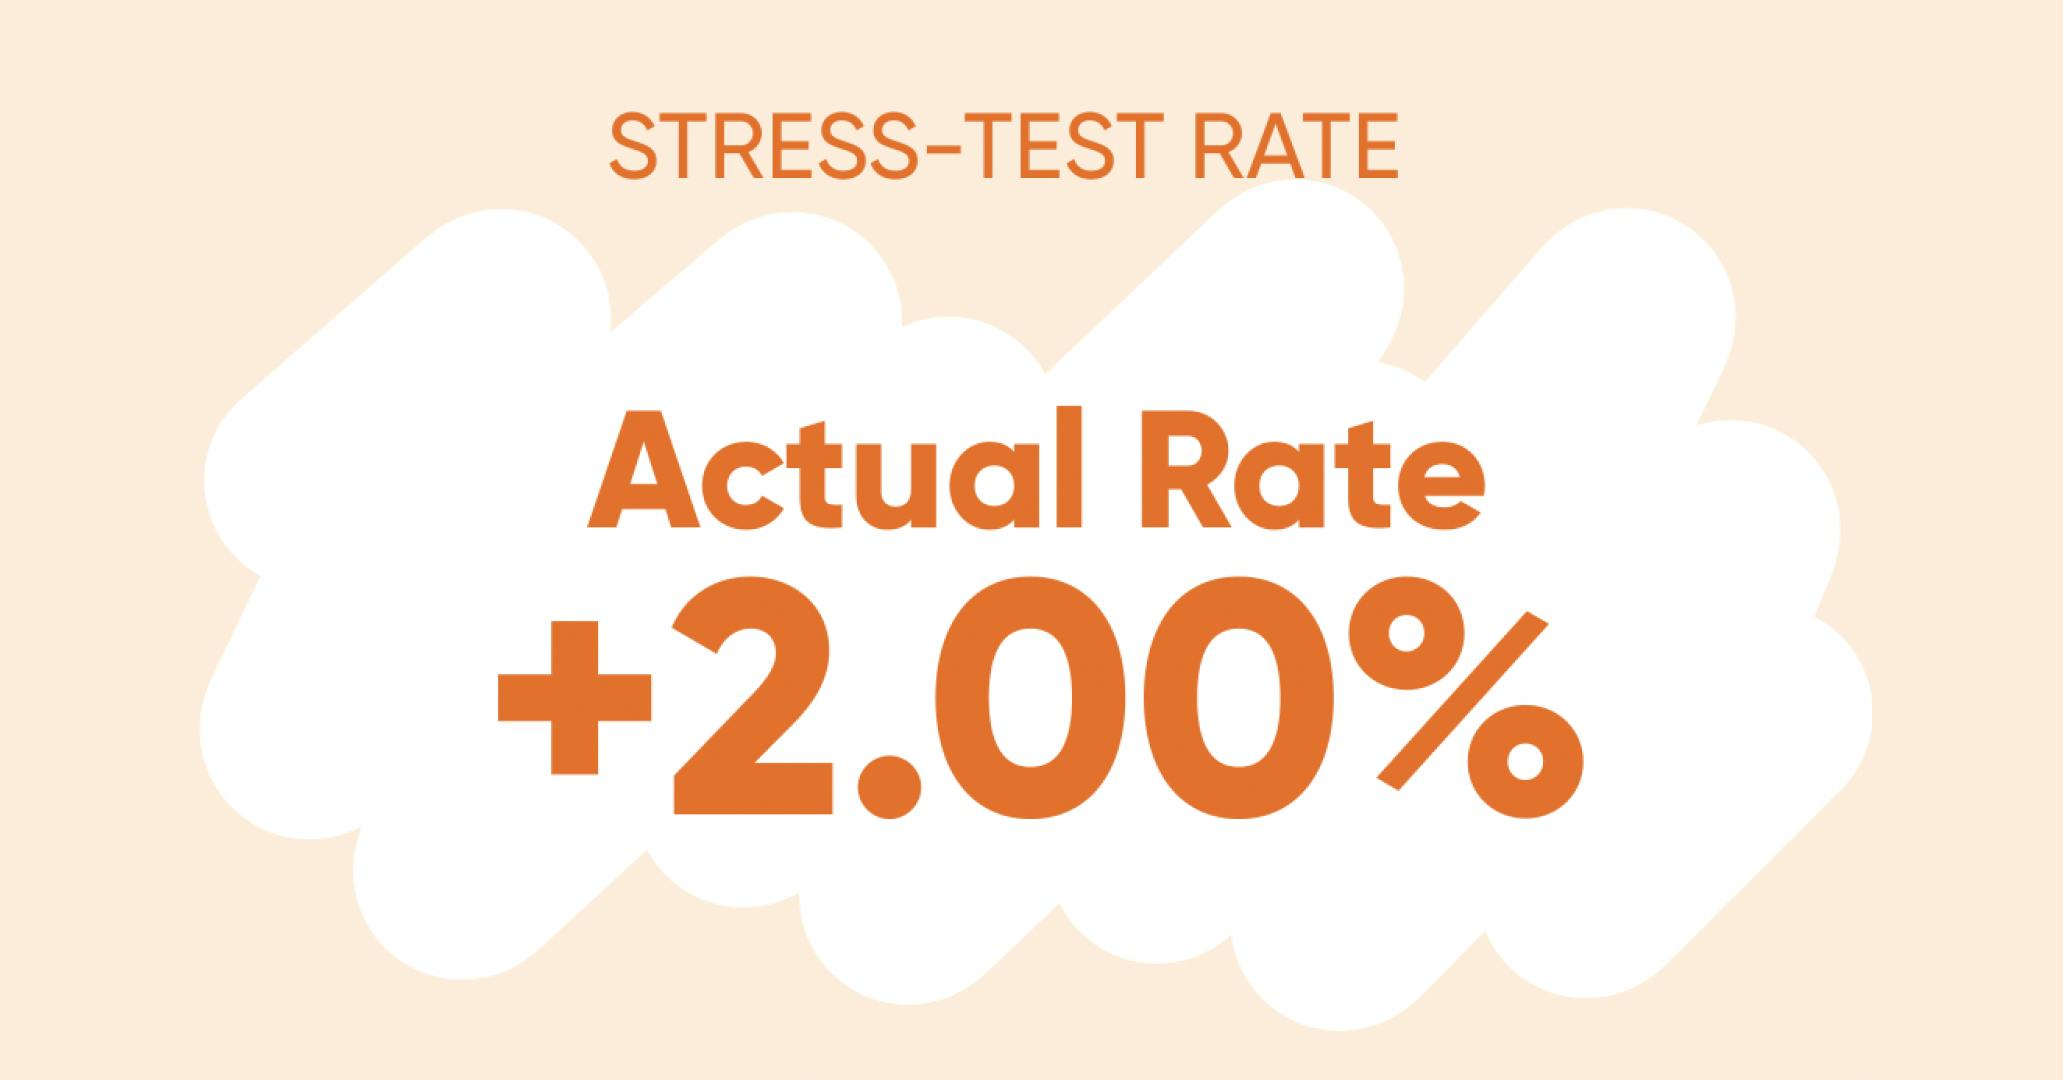 Say goodbye to your stress test rate of 5.25% in 2022